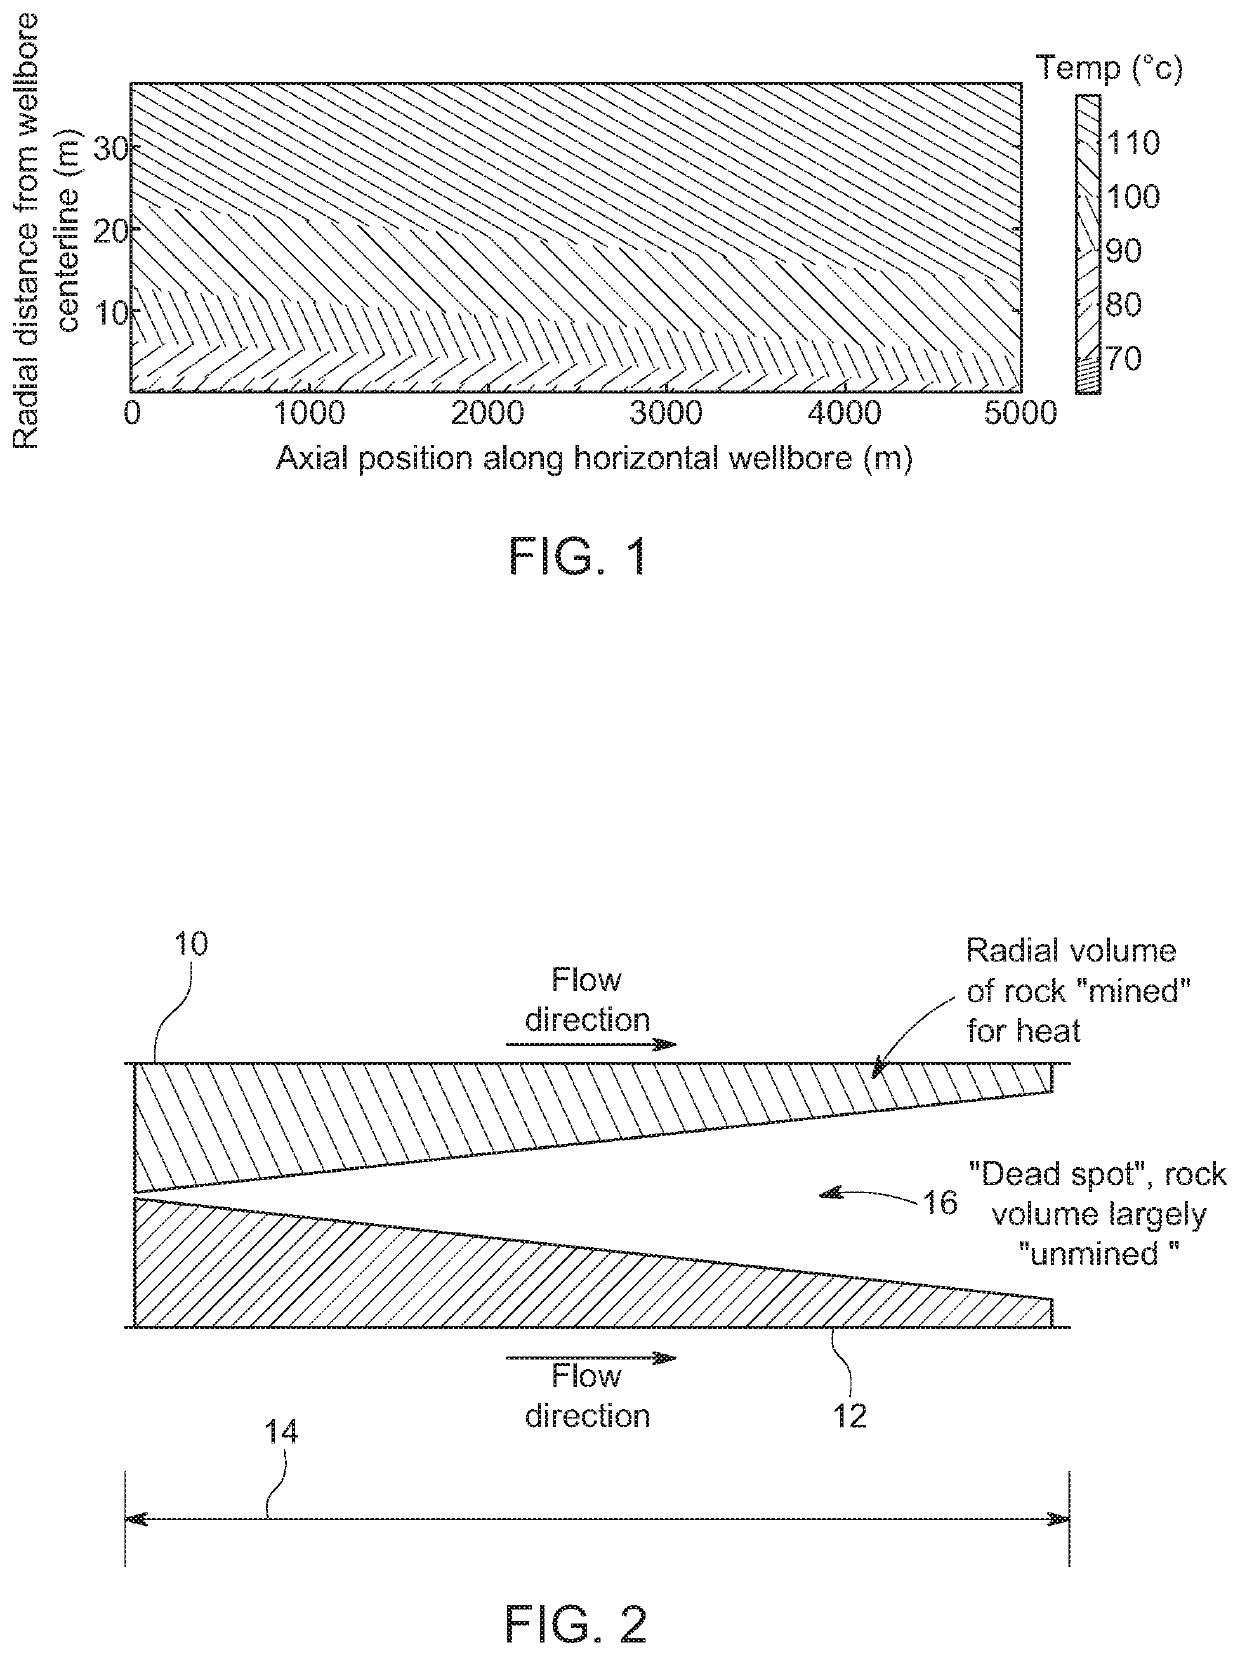 Method for thermal profile control and energy recovery in geothermal wells